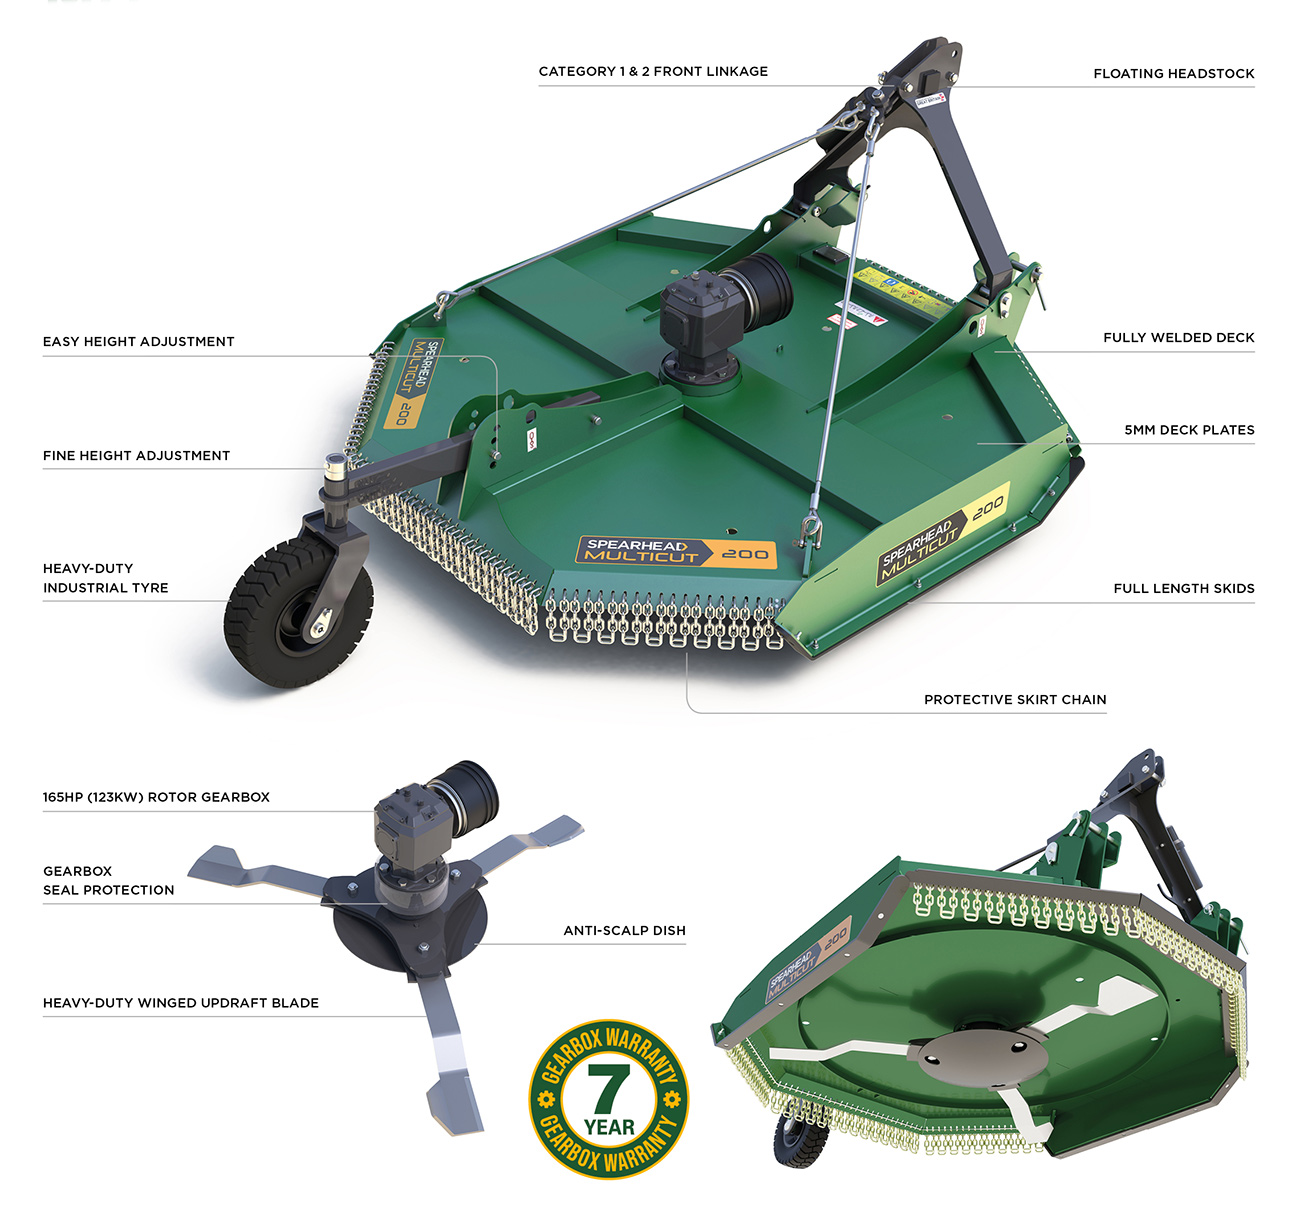 Multicut 200 Rotary Mower features